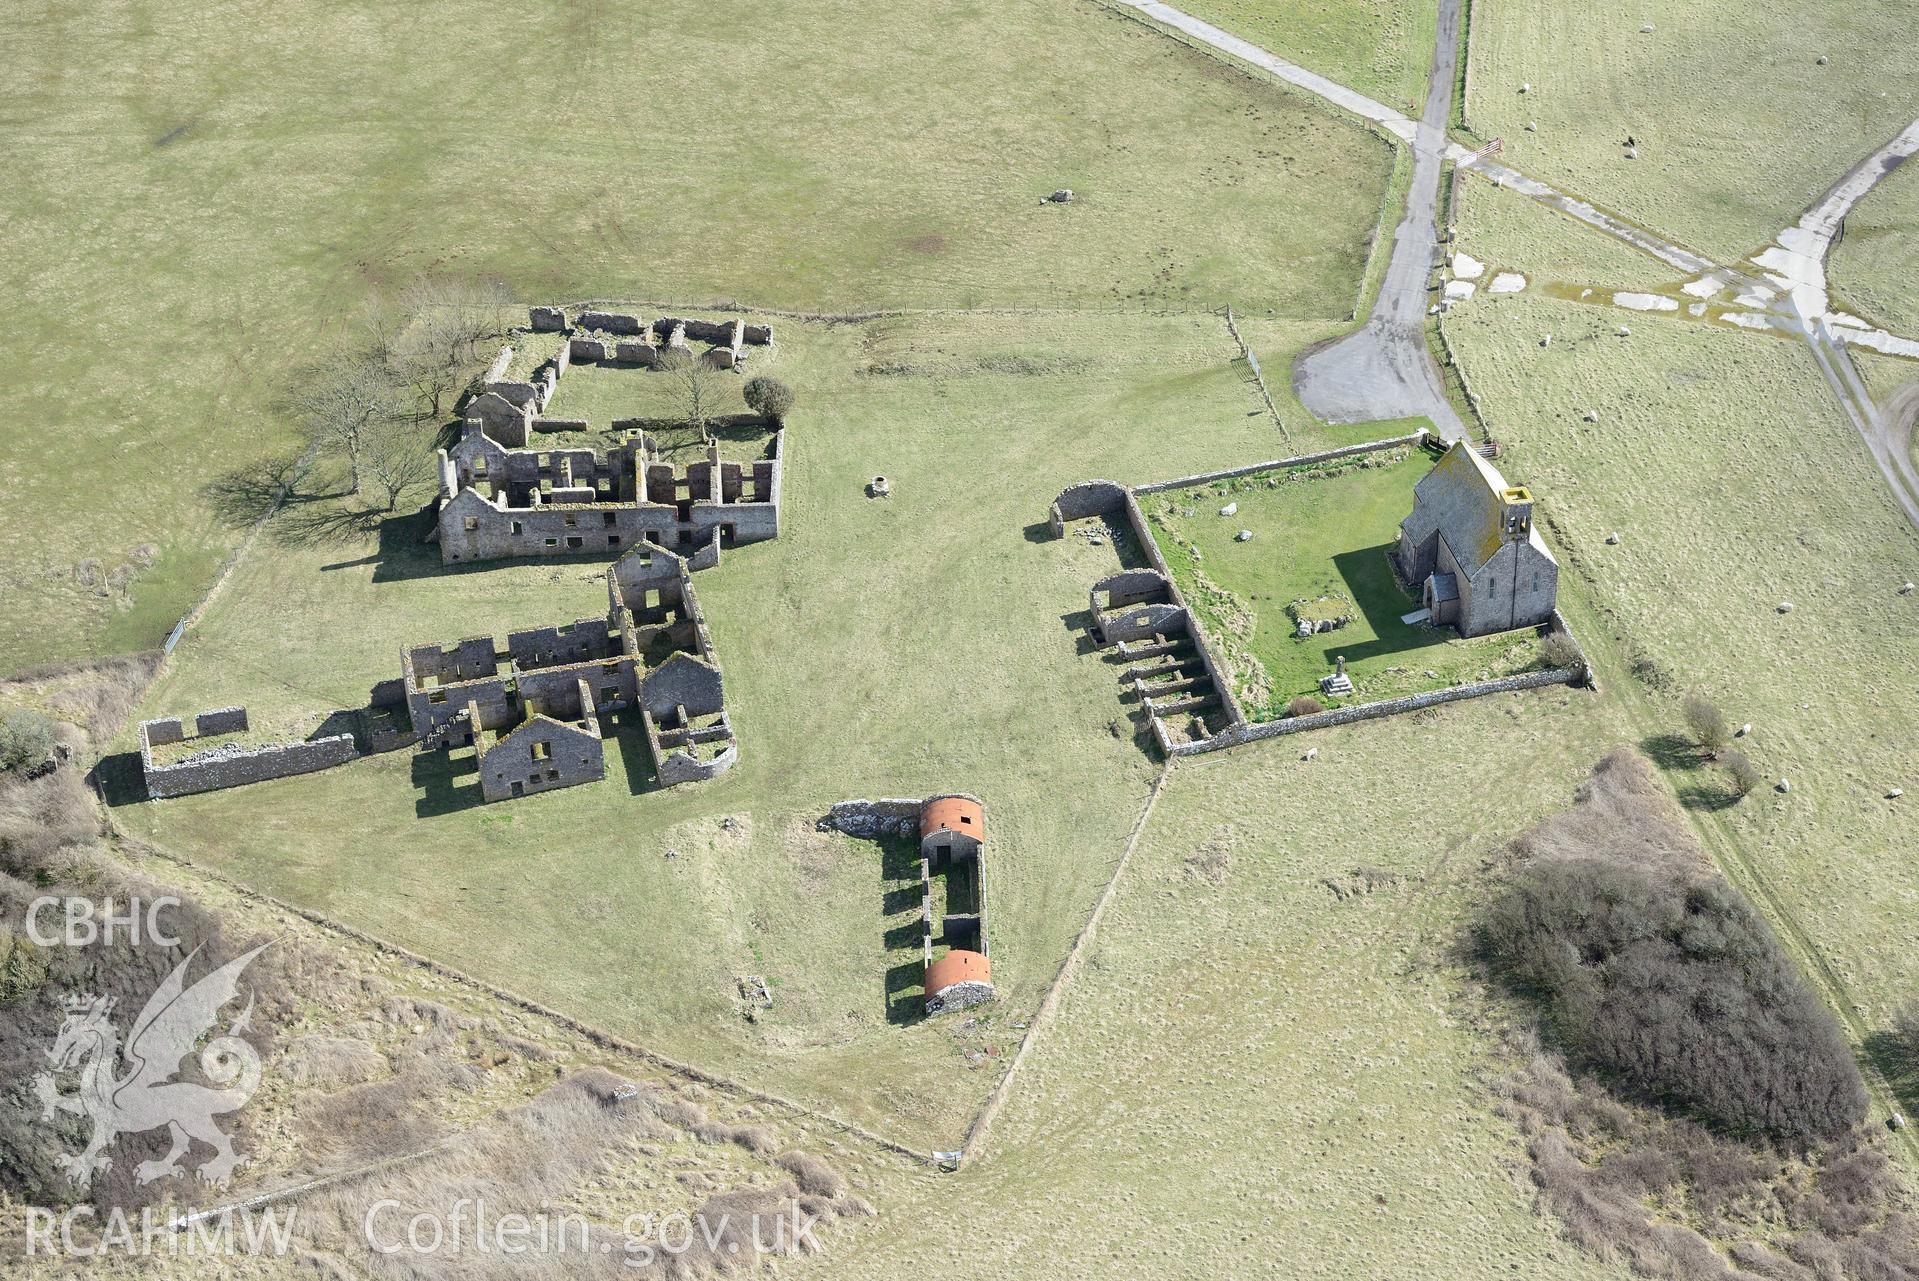 Flimston Farmhouse. Baseline aerial reconnaissance survey for the CHERISH Project. ? Crown: CHERISH PROJECT 2018. Produced with EU funds through the Ireland Wales Co-operation Programme 2014-2020. All material made freely available through the Open Government Licence.